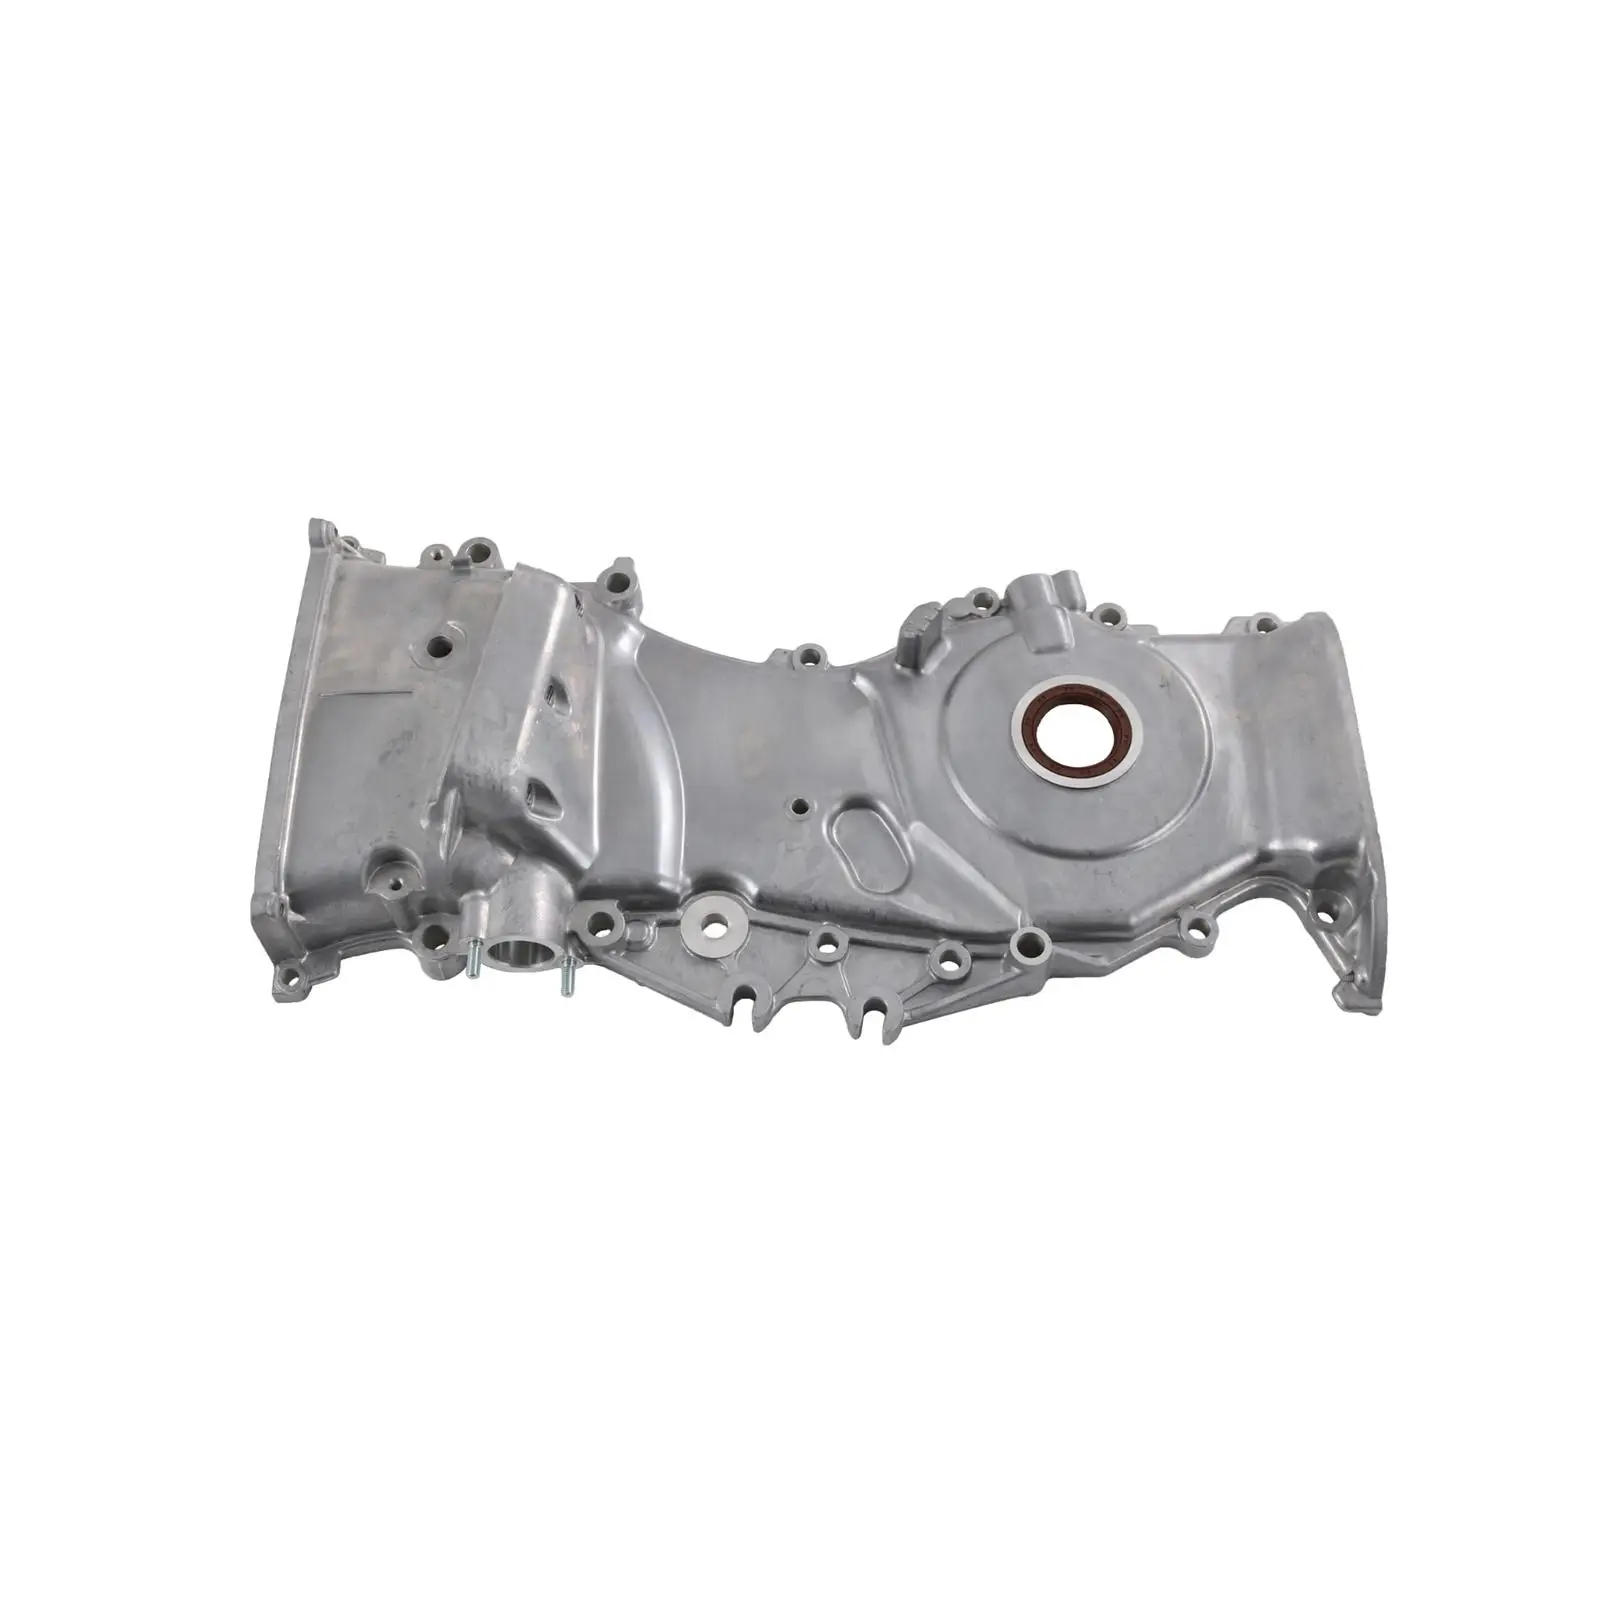 Engine Timing Cover 2azfe 1131028070 for Toyota for camry Solara Components